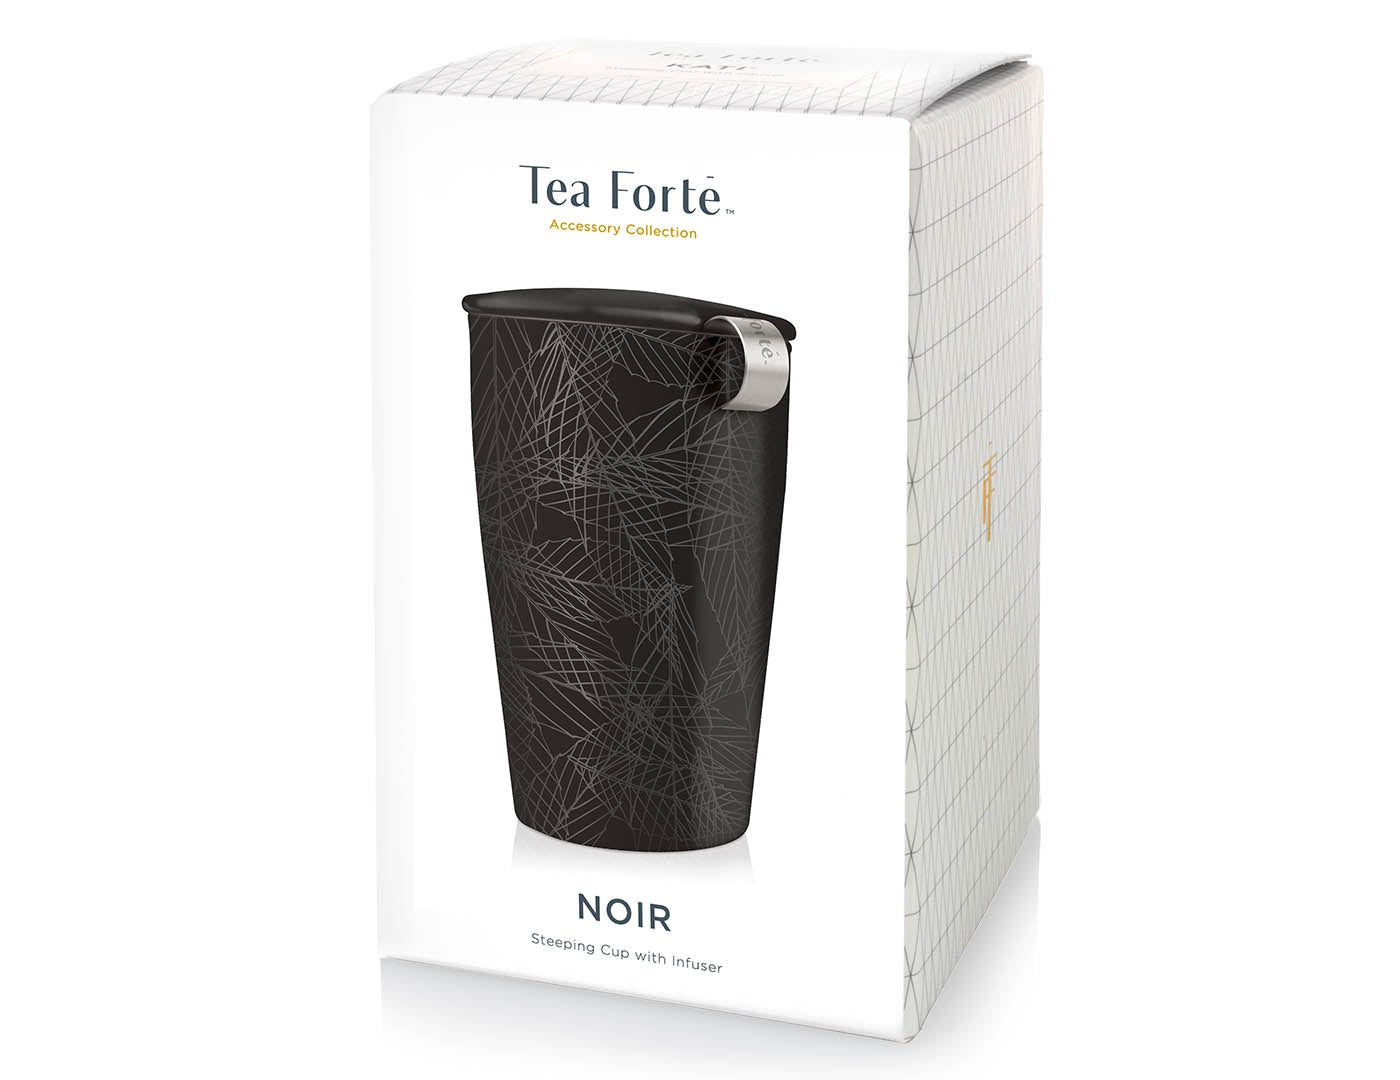 Noir design KATI® Steeping cup with infuser showing packaging